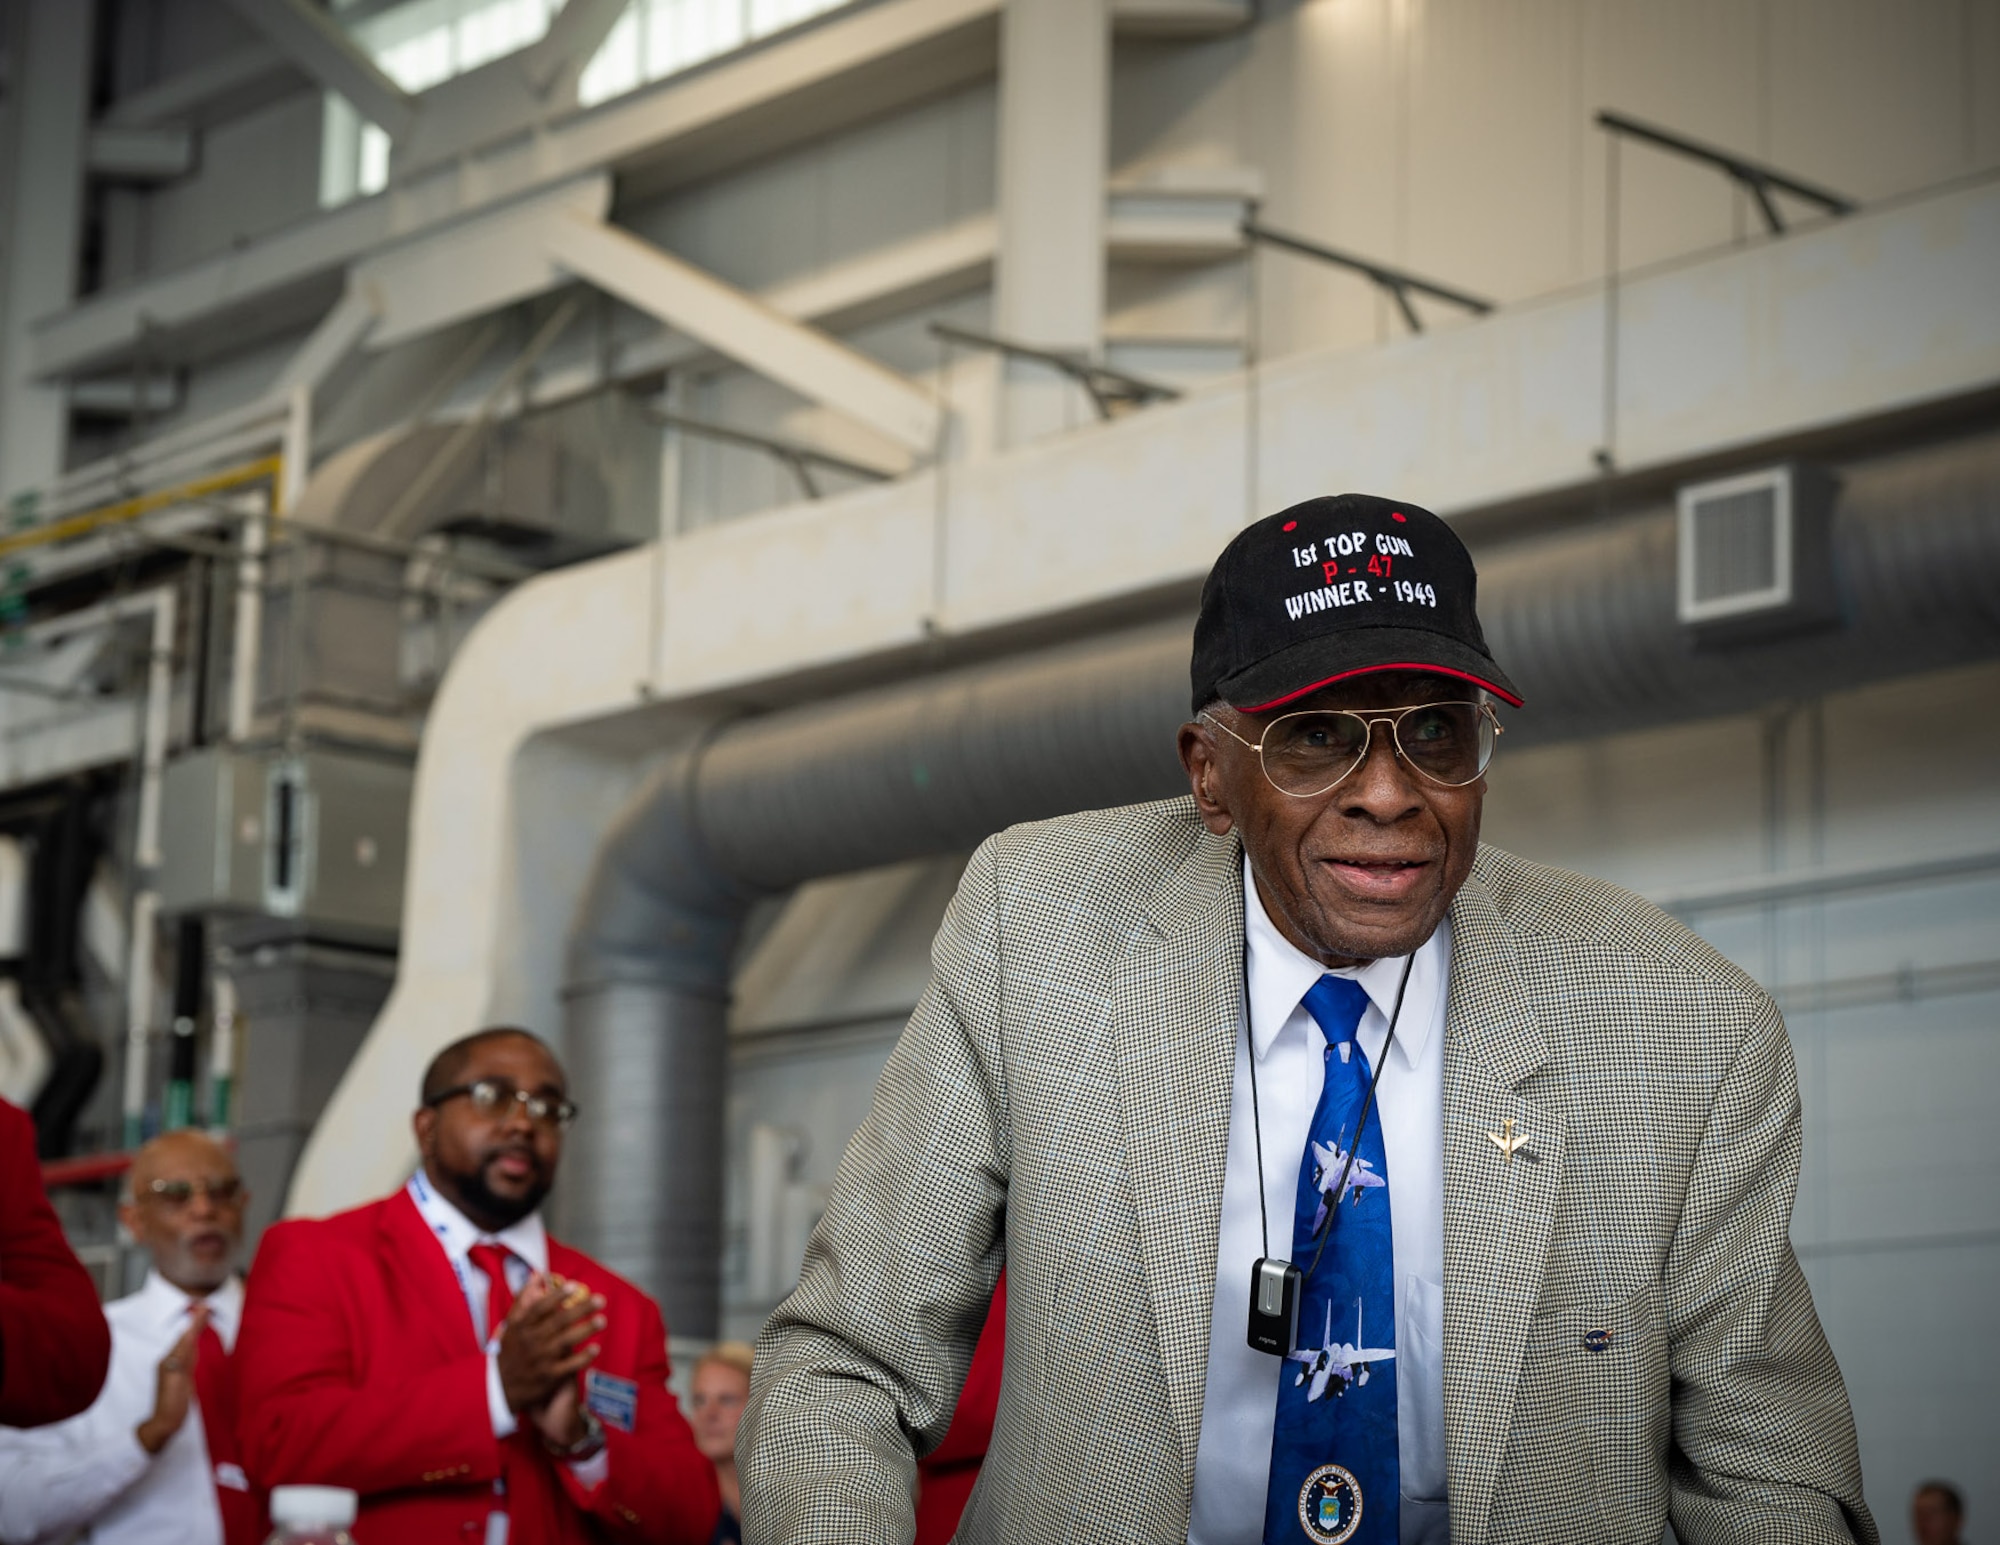 U.S. Air Force retired Lt. Col. James Harvey III a member of the storied 332nd Fighter Group of the Tuskegee Airmen is applauded during the William Tell 2023 opening ceremony dinner at the Air Dominance Center in Savannah, Ga. Col. Harvey and the 332d Fighter Group were the winners of the “Best Overall Team Award” during the first-ever gunnery meet held in 1949 at Nellis Air Force Base, Nevada. The best air and ground crews from across the Air Force fighter enterprise will compete in September at the 2023 William Tell Air-to-Air Weapons Meet, the first fighter competition of its kind in nearly two decades.